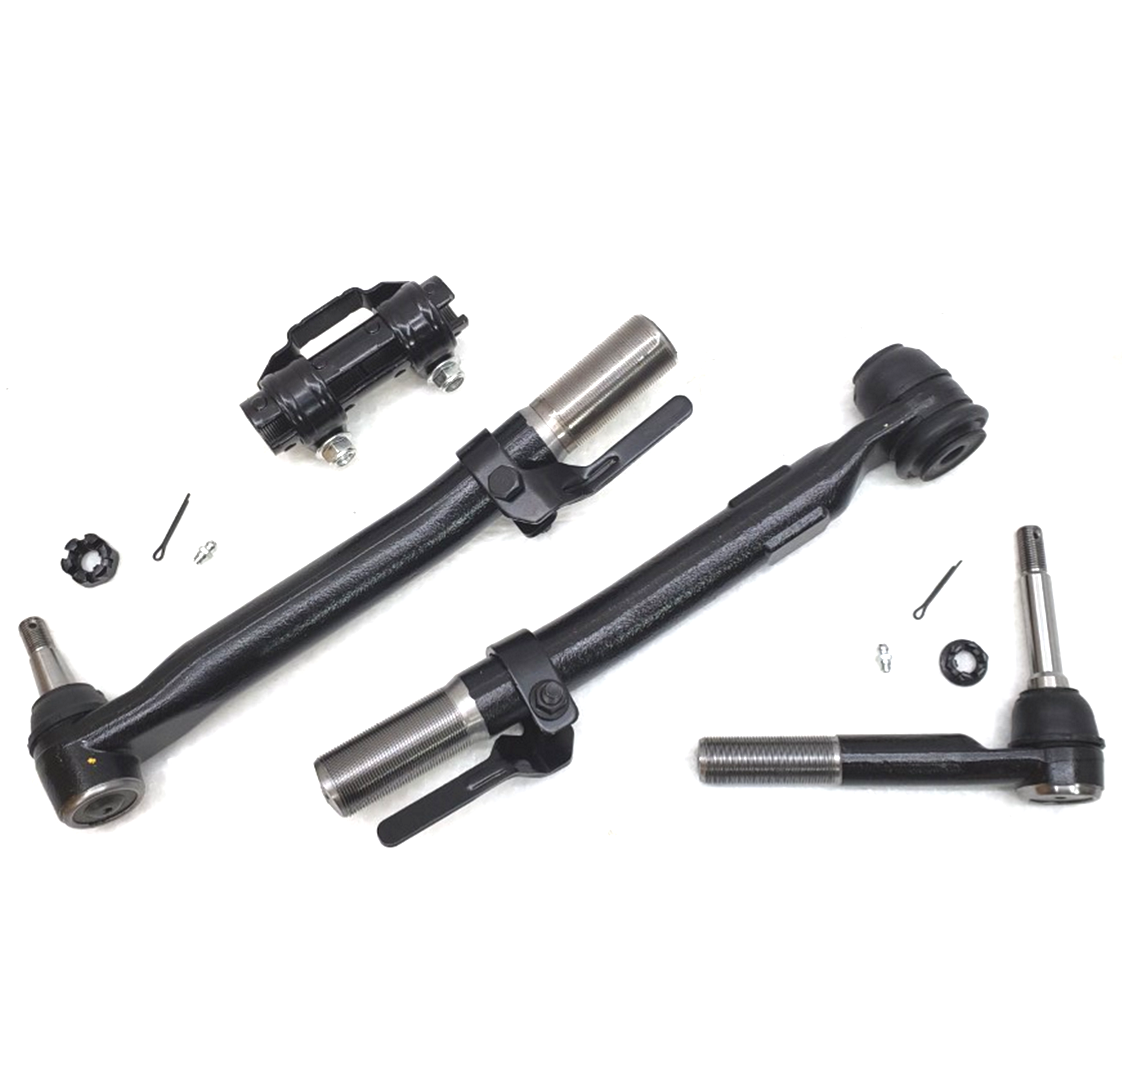 Lifetime Auto Parts Tie Rod Steering Kit for 2017-2019 Ford F250, F350 4x4 Wide Frame